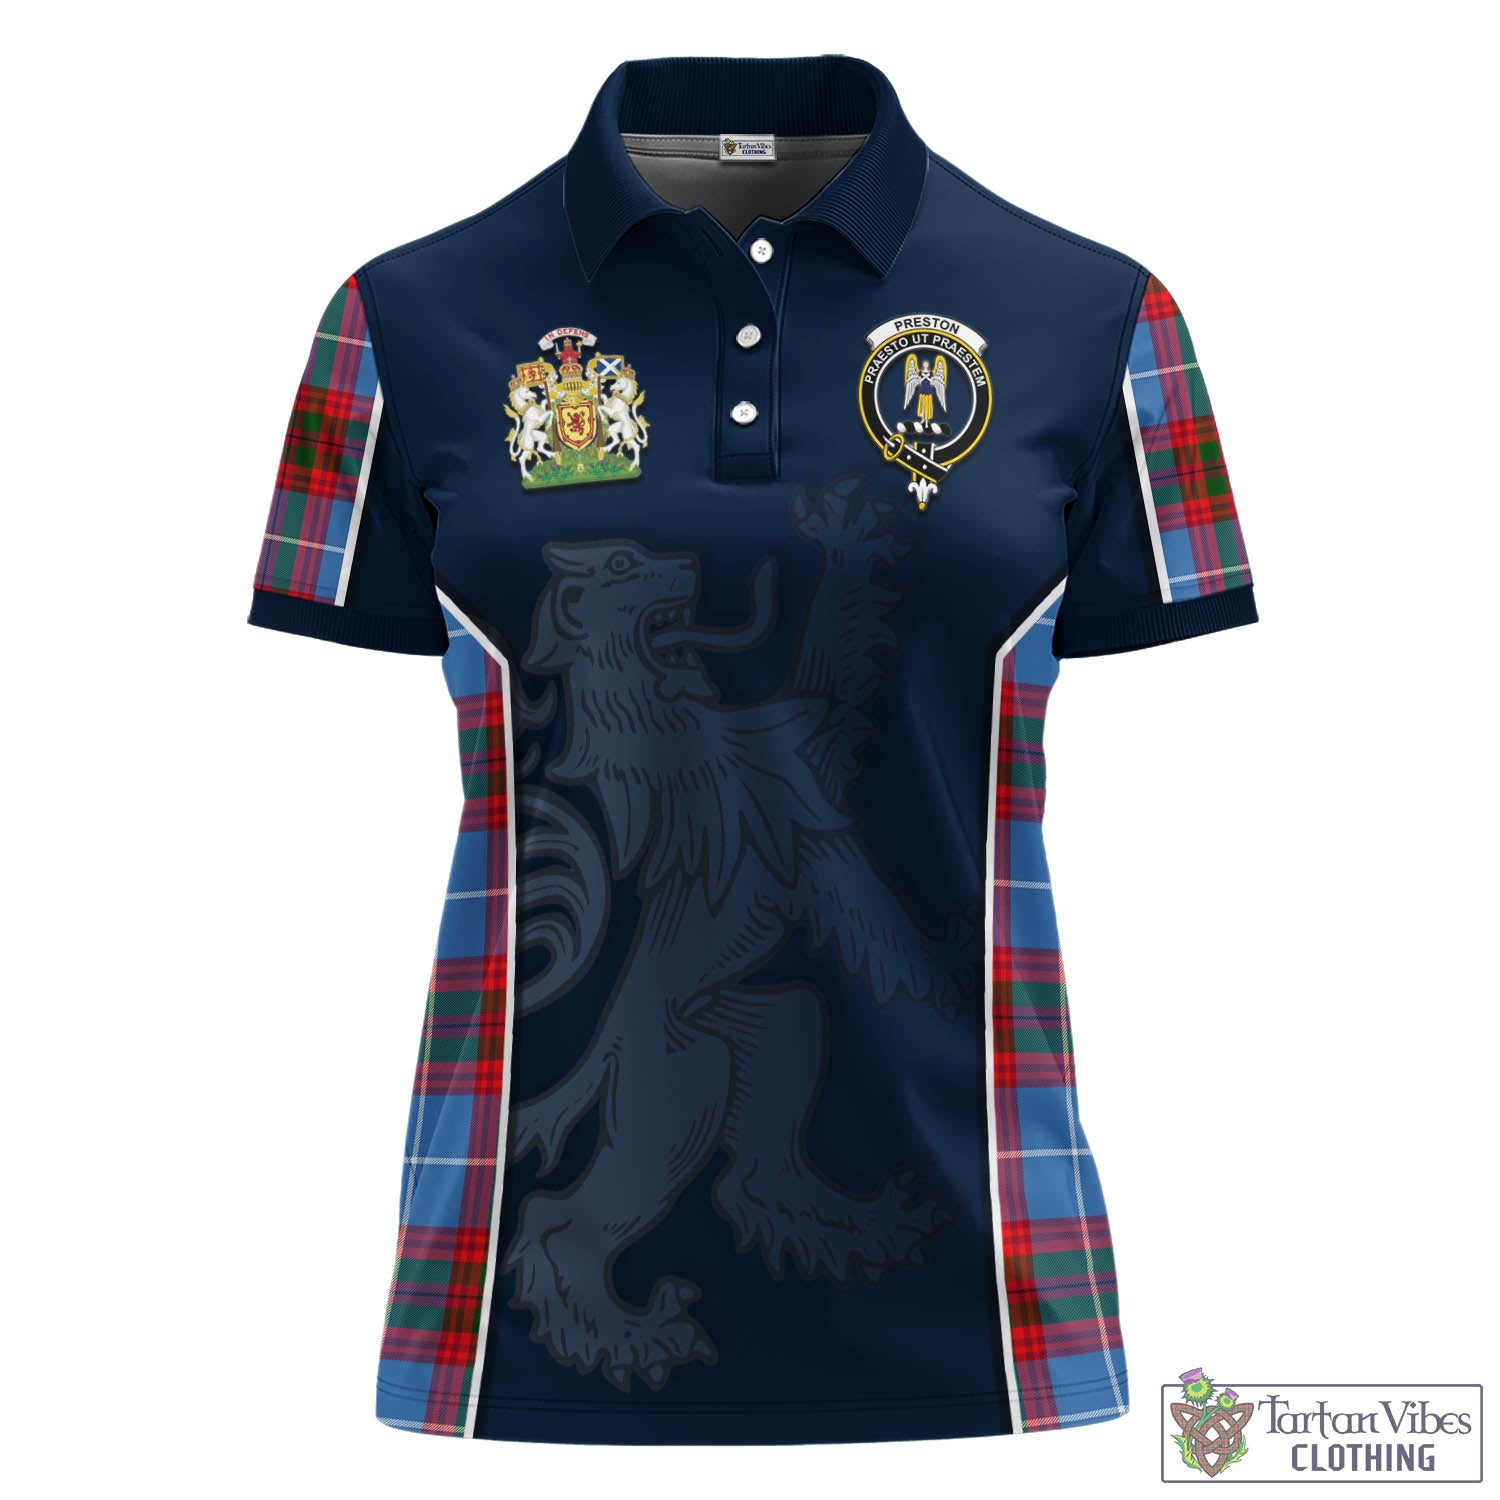 Tartan Vibes Clothing Preston Tartan Women's Polo Shirt with Family Crest and Lion Rampant Vibes Sport Style